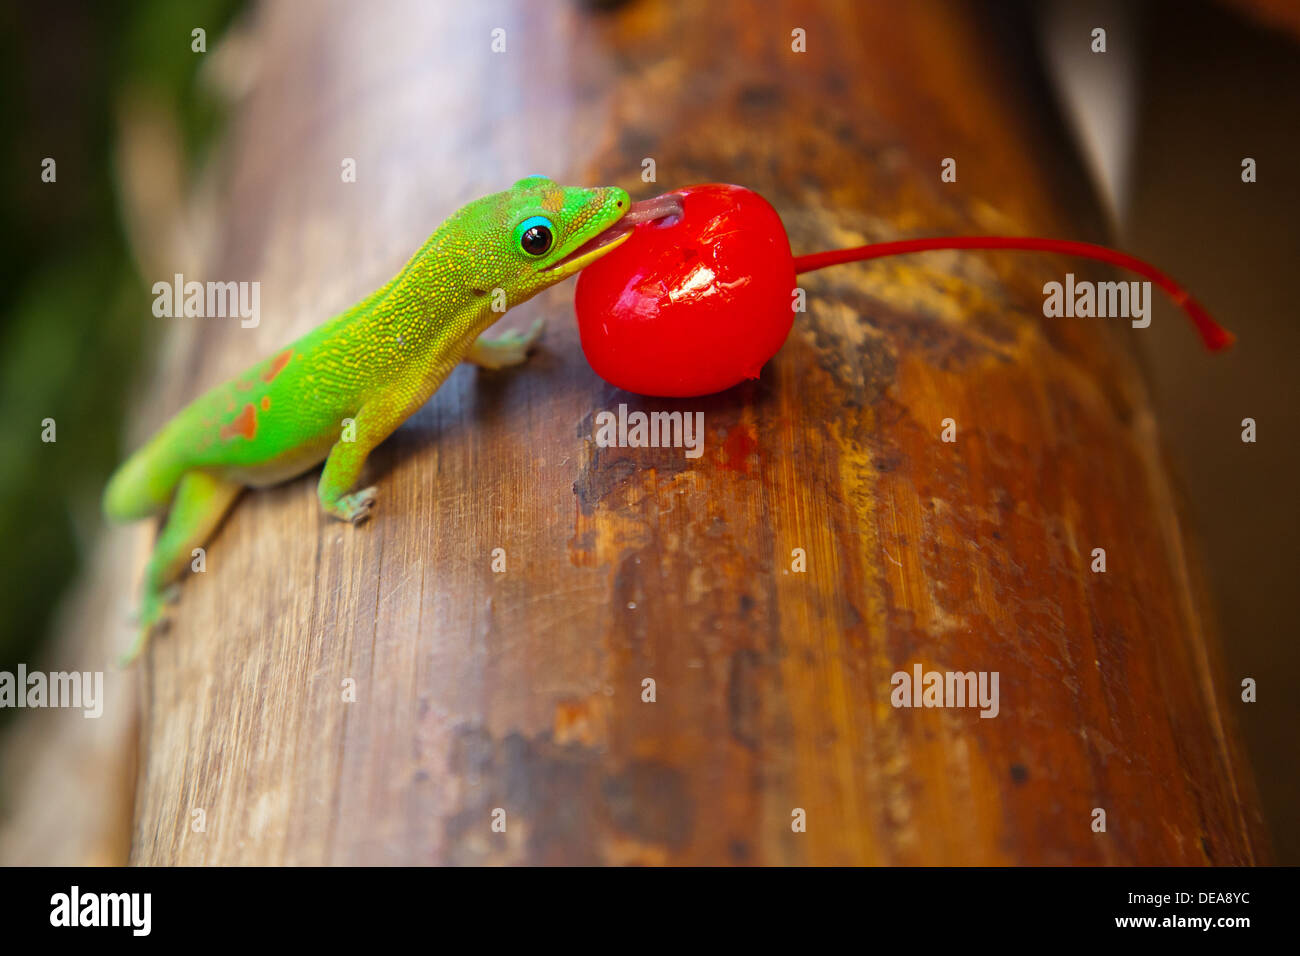 A bright gold dust day gecko (Phelsuma laticauda) feeds on a cherry while sitting on a piece of bamboo. Stock Photo